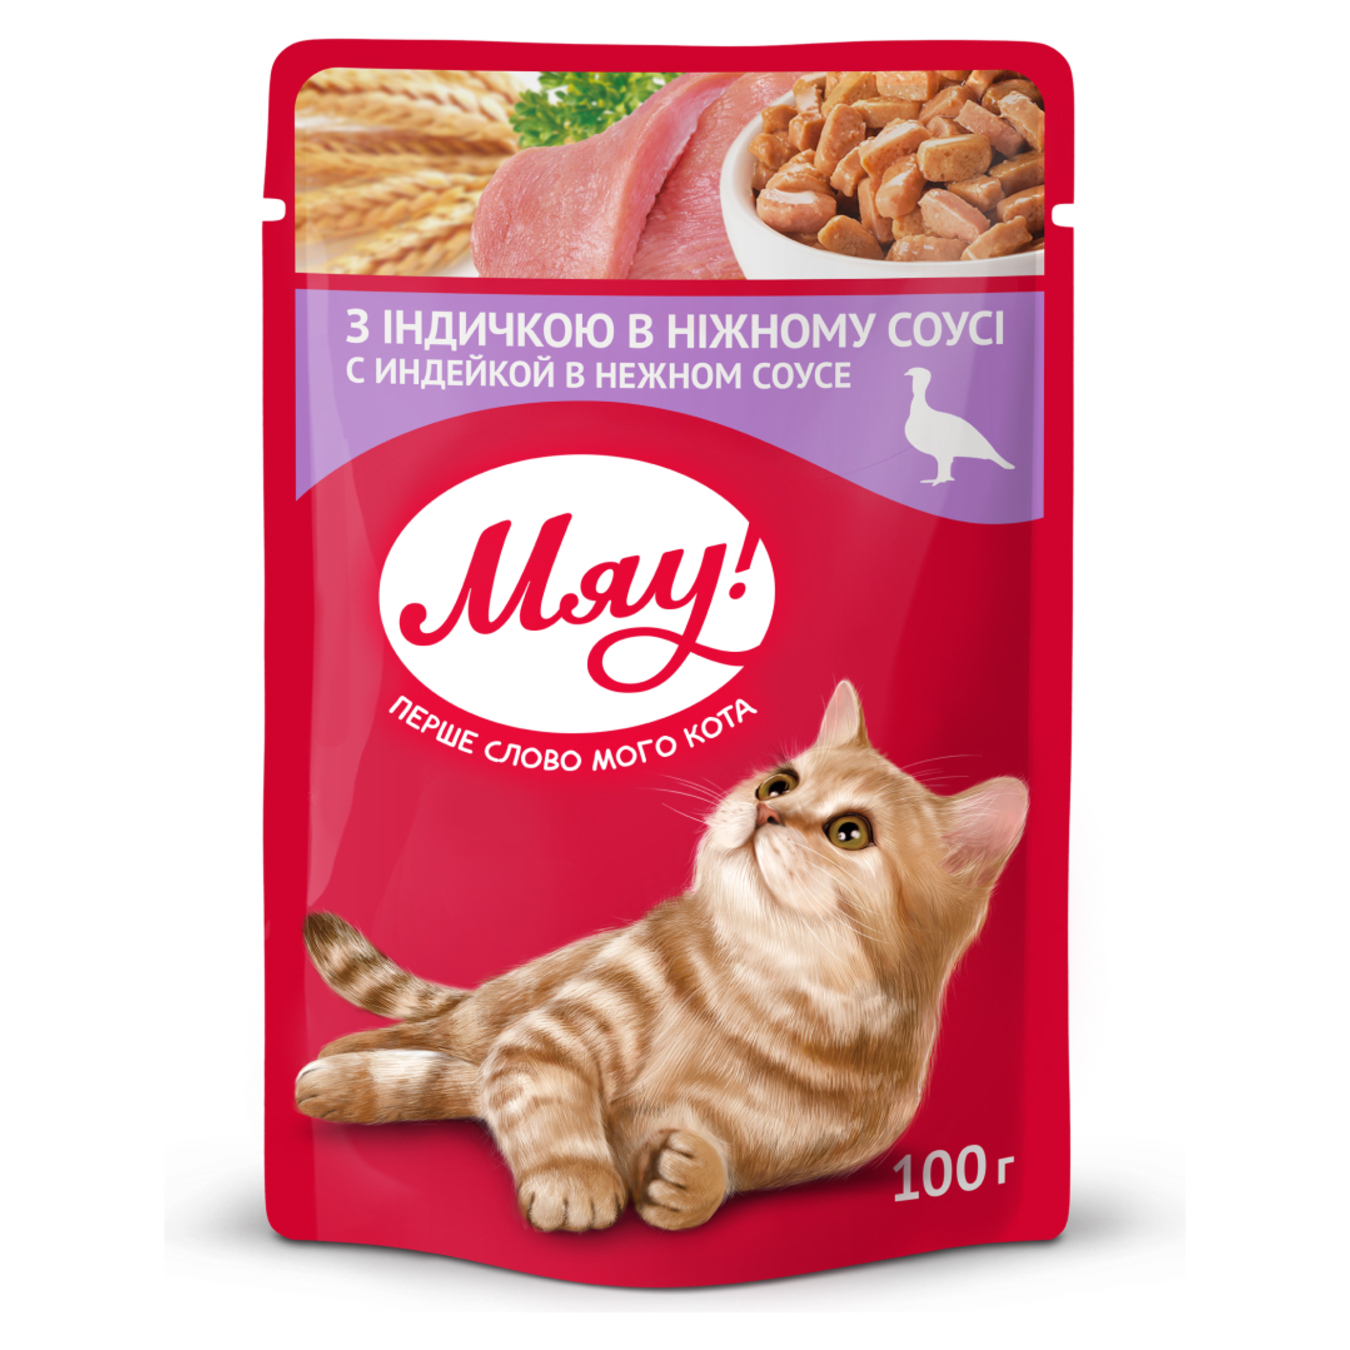 Miau! full-rationed canned pet food for adult cats With turkey in delicate sauce 100g